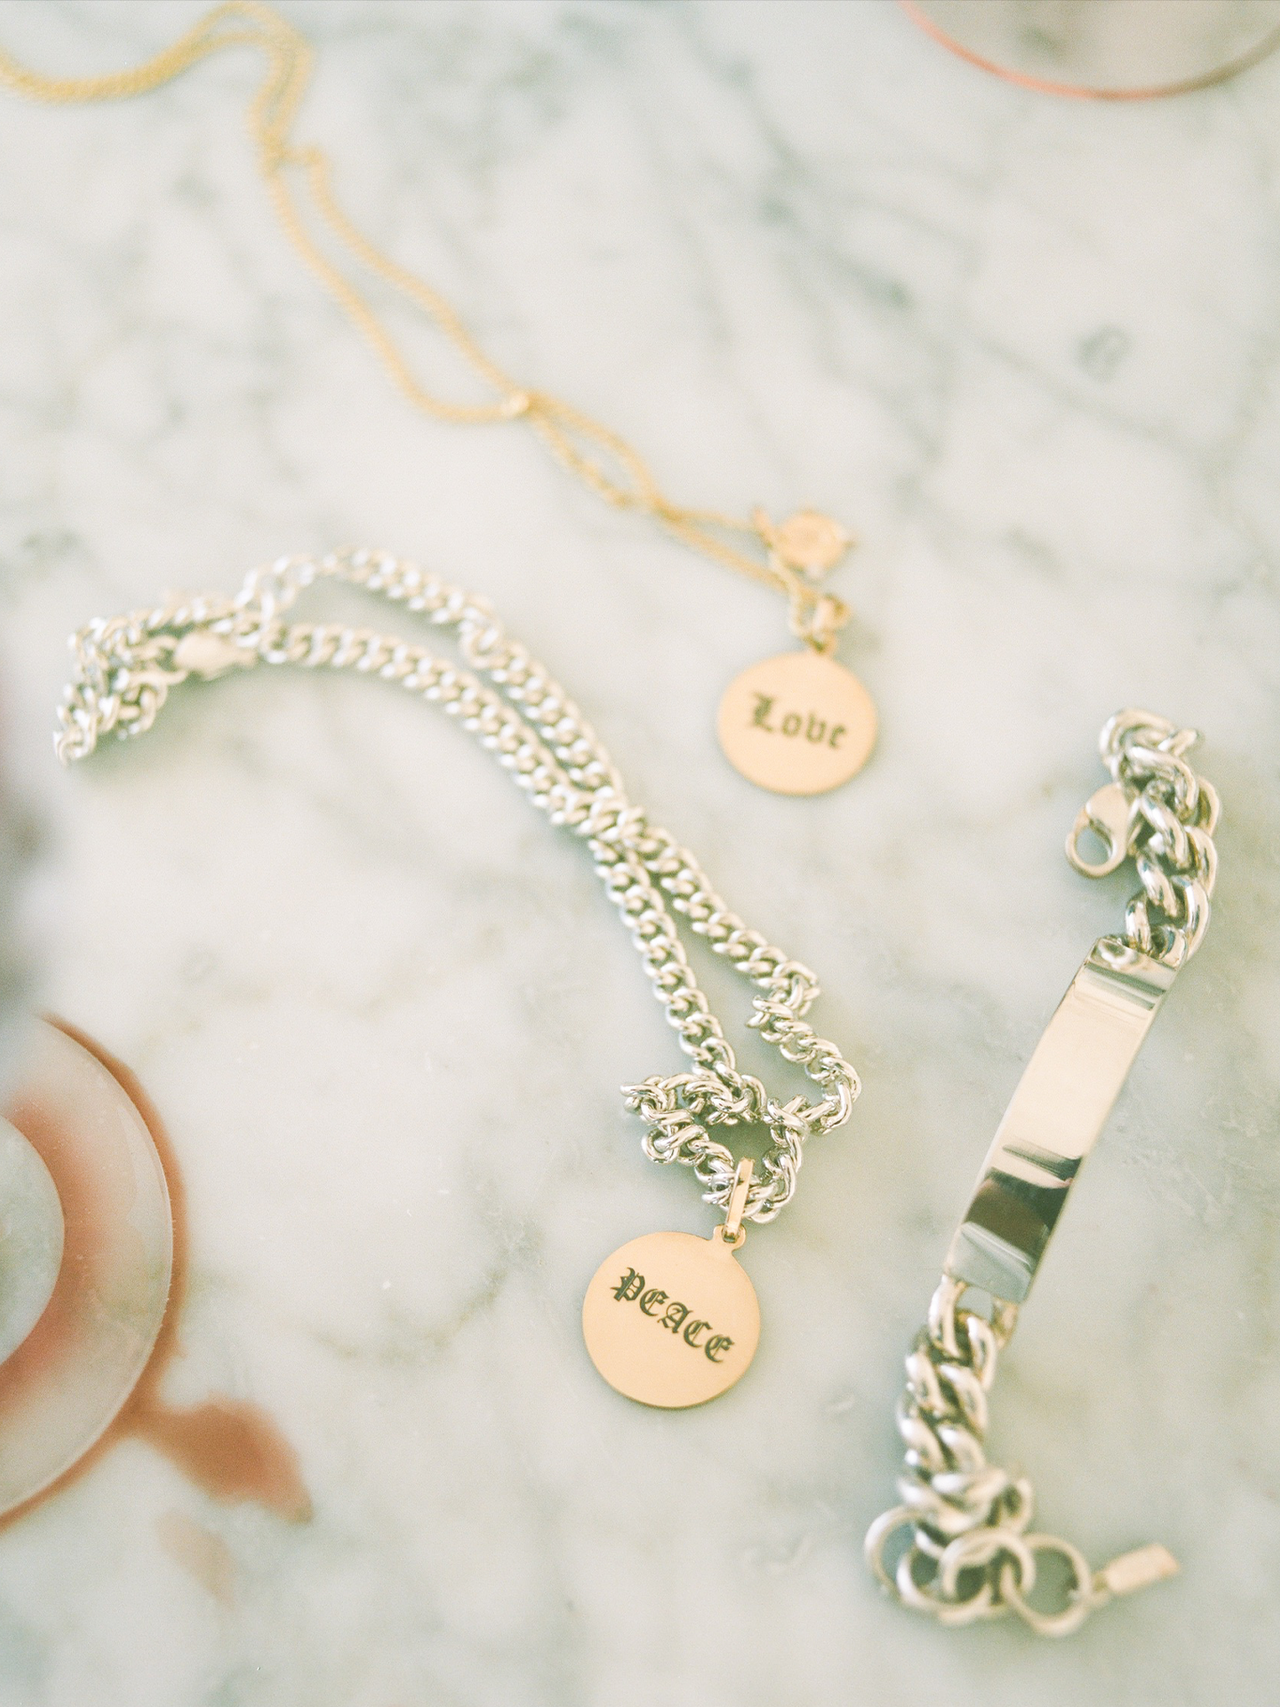 flat lay imagery of disk pendants engraved with the words "love" and "peace" in gothic writing on marble backdrop